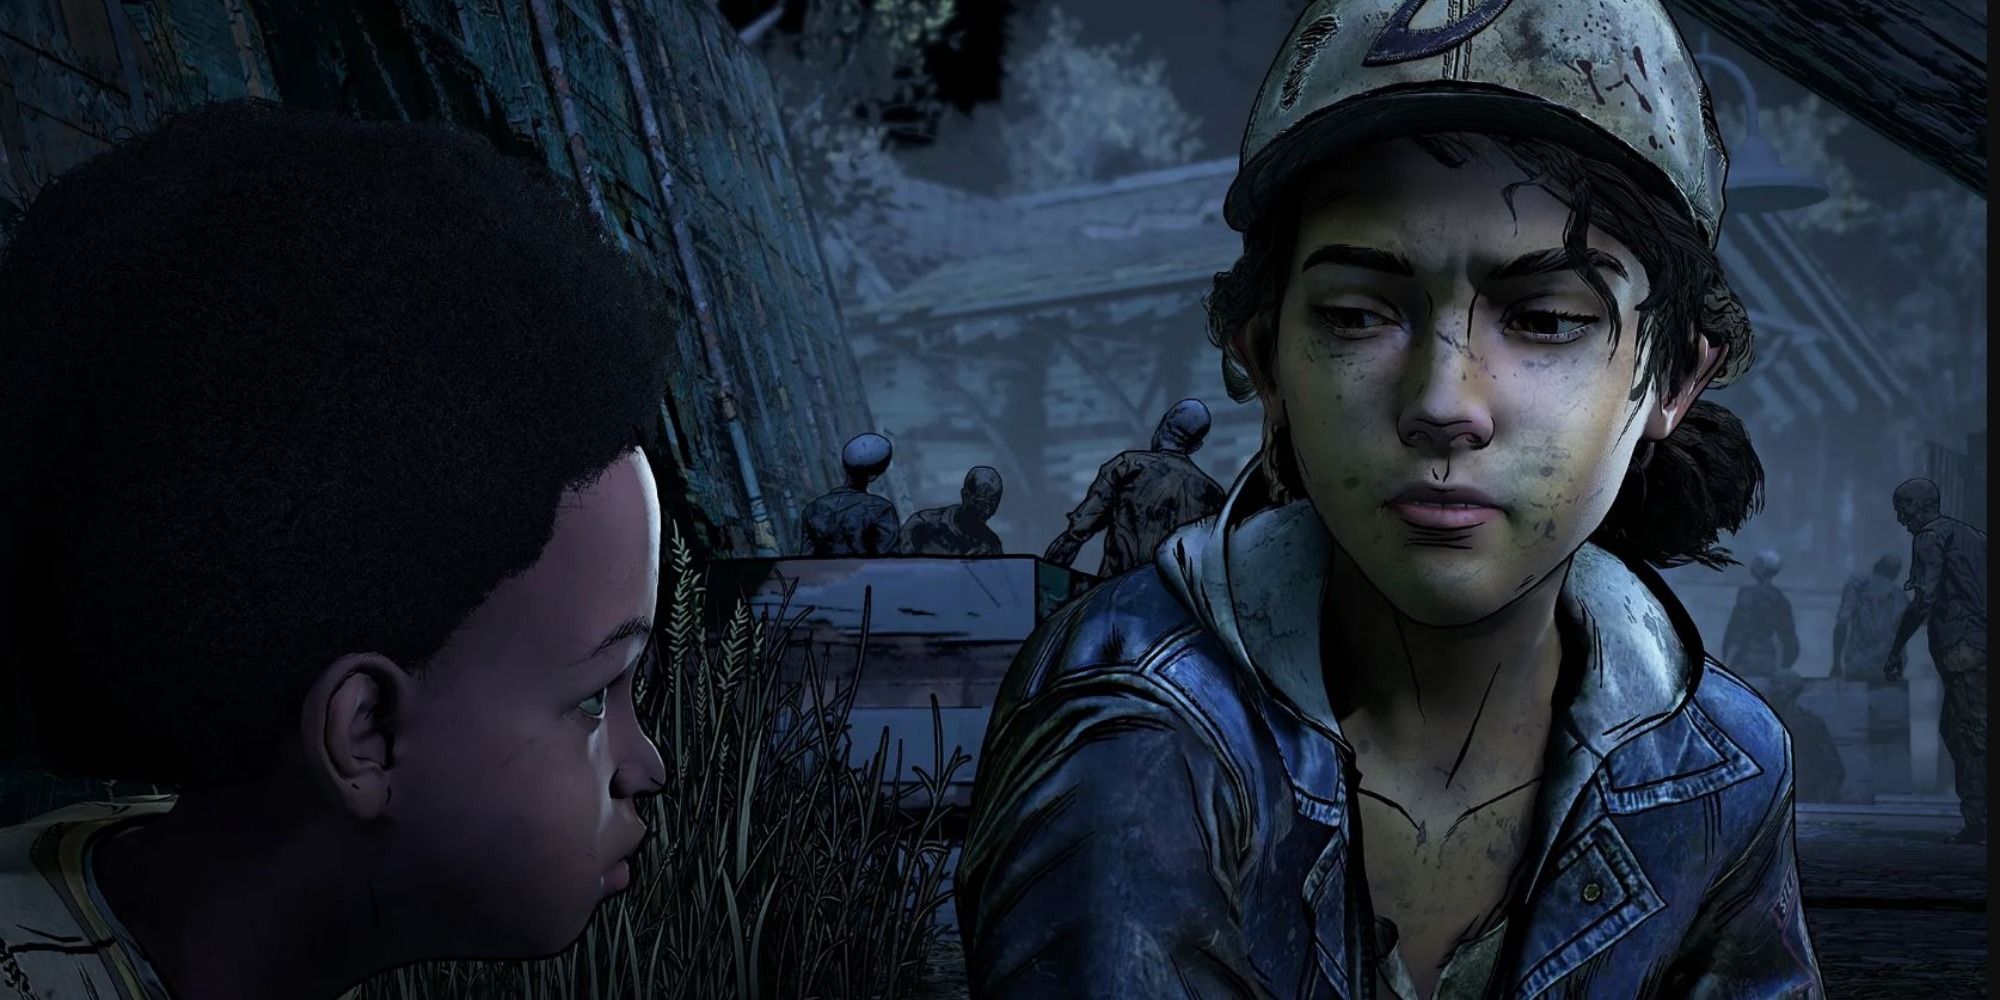 Clementine looks down at AJ while a zombie hoard lurks in the background